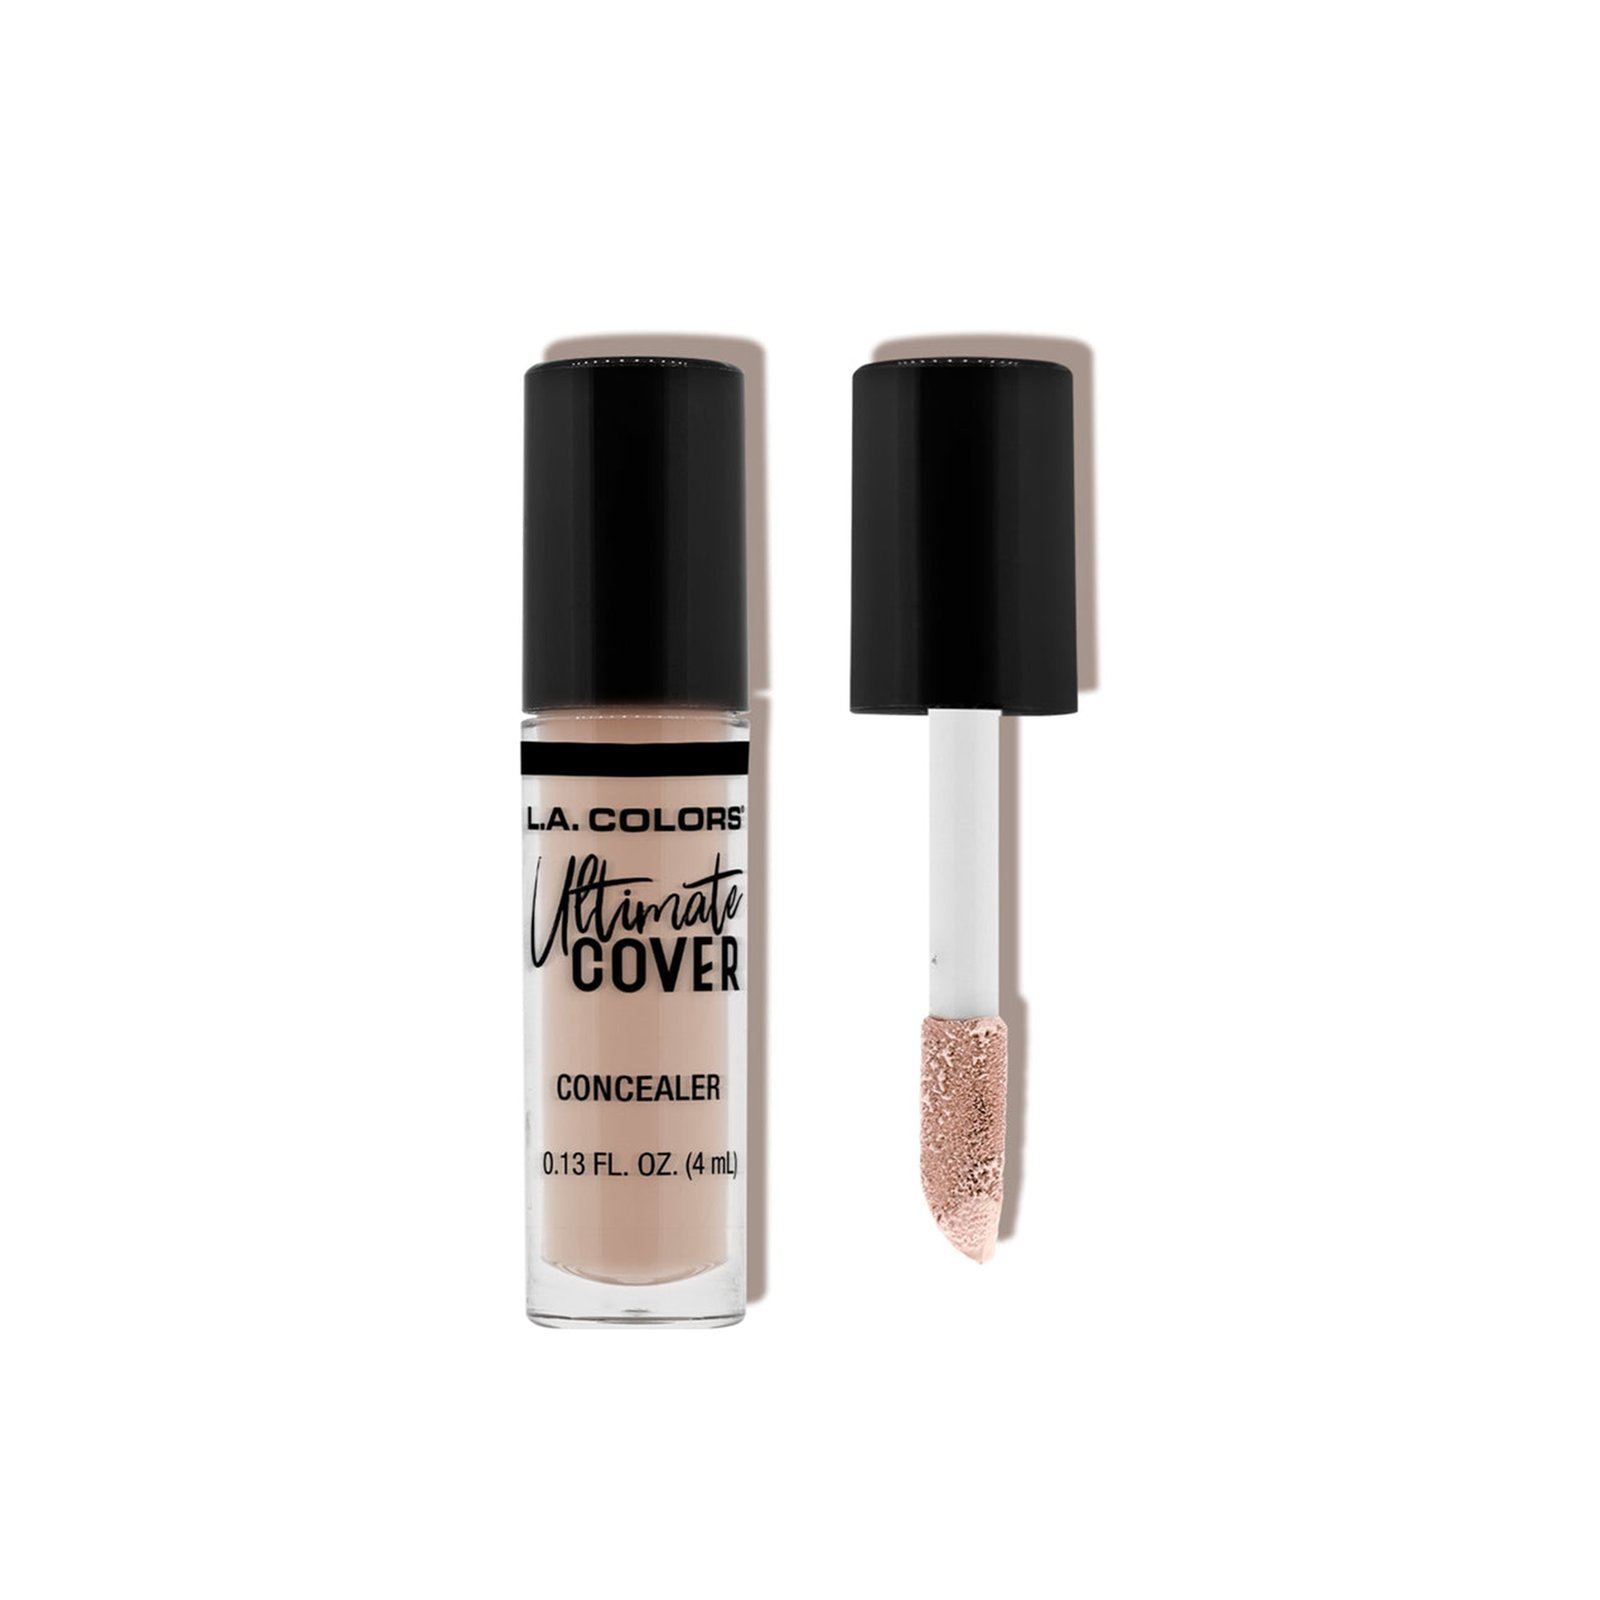 L.A. Colors Ultimate Cover Concealer CC904 Ivory 4ml